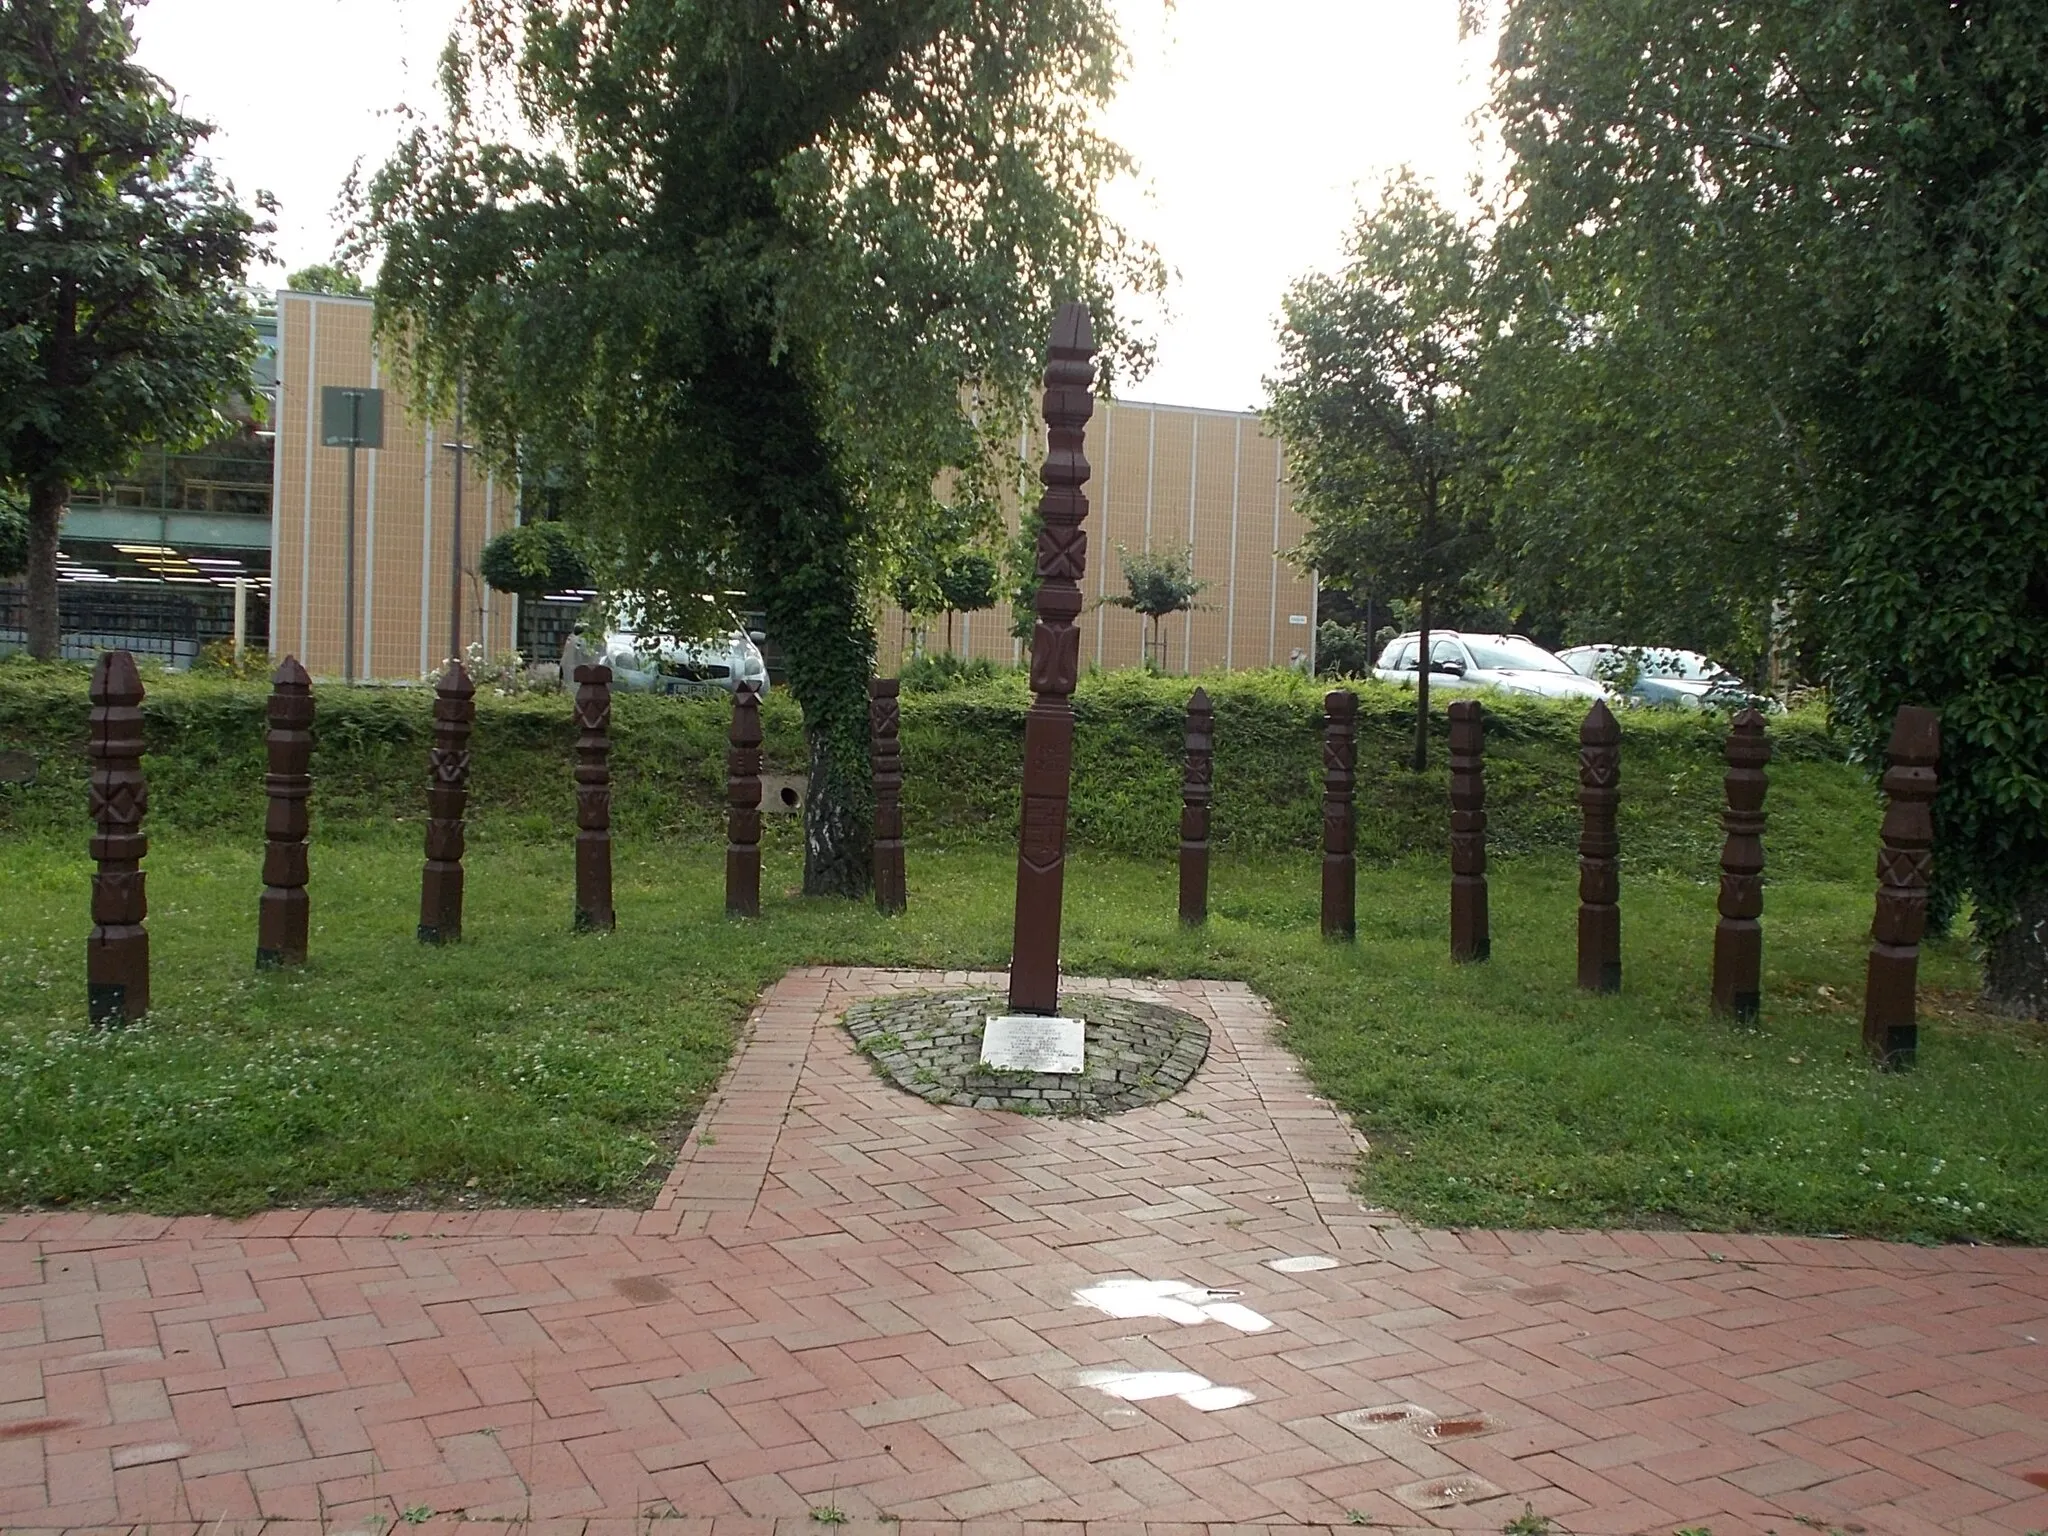 Photo showing: 'In memory of the martyrs of Arad' A Memorial to the 13 martyrs of Arad by József Miklós woodcarver  (Installed for the 150th anniversary in 1989), This is a kopjafa group memorial and a ground based plaque with names of the martyrs. - in a small Park (Martyrs of Arad Grove?) at Derkovits Street and Kiss Ernő Street corner, Békéscsaba, Békés County, Hungary.